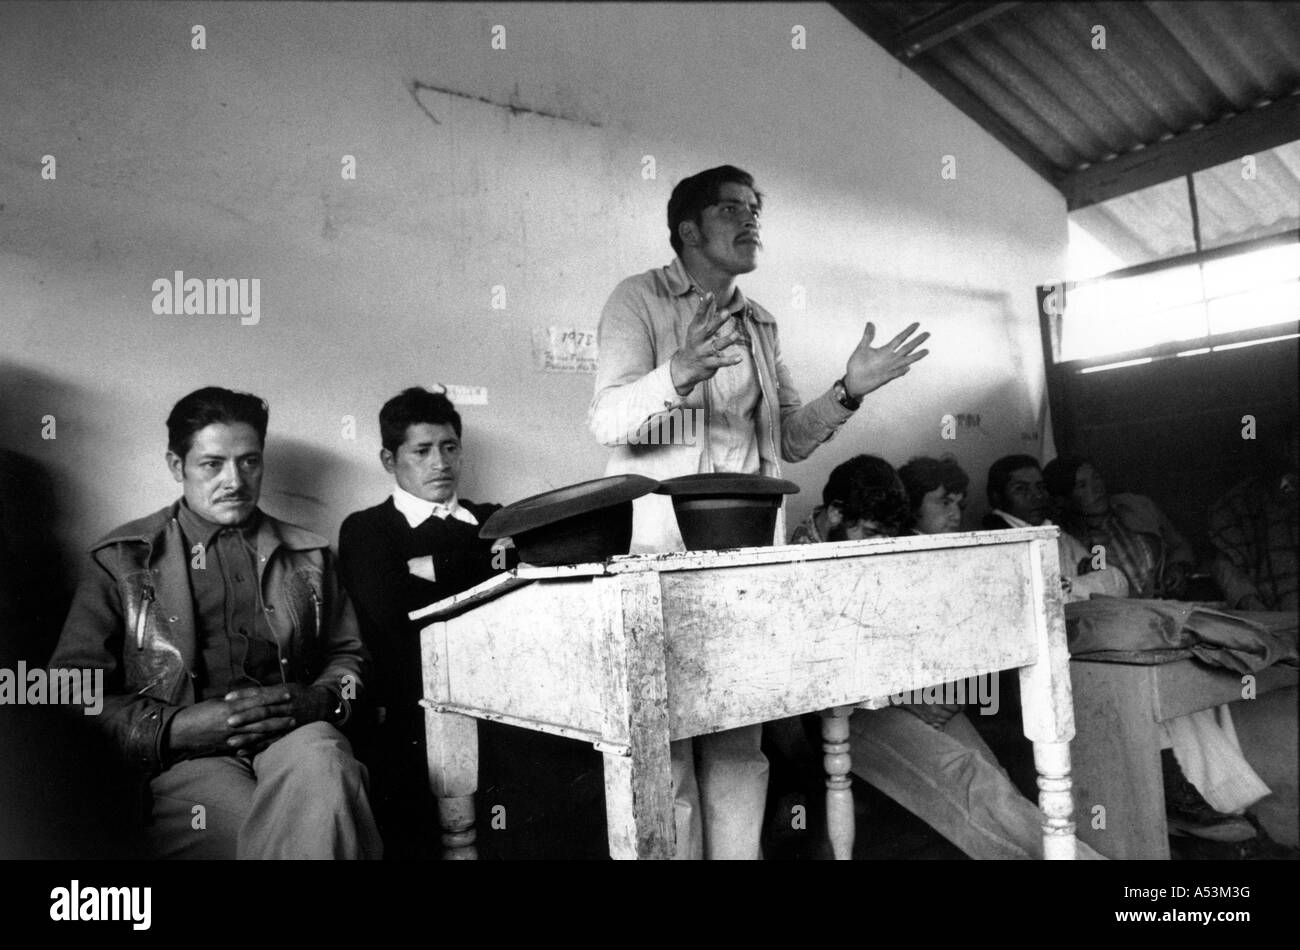 Painet ha1357 157 black and white stress community leader making impassioned speech land reform ecuador country developing Stock Photo